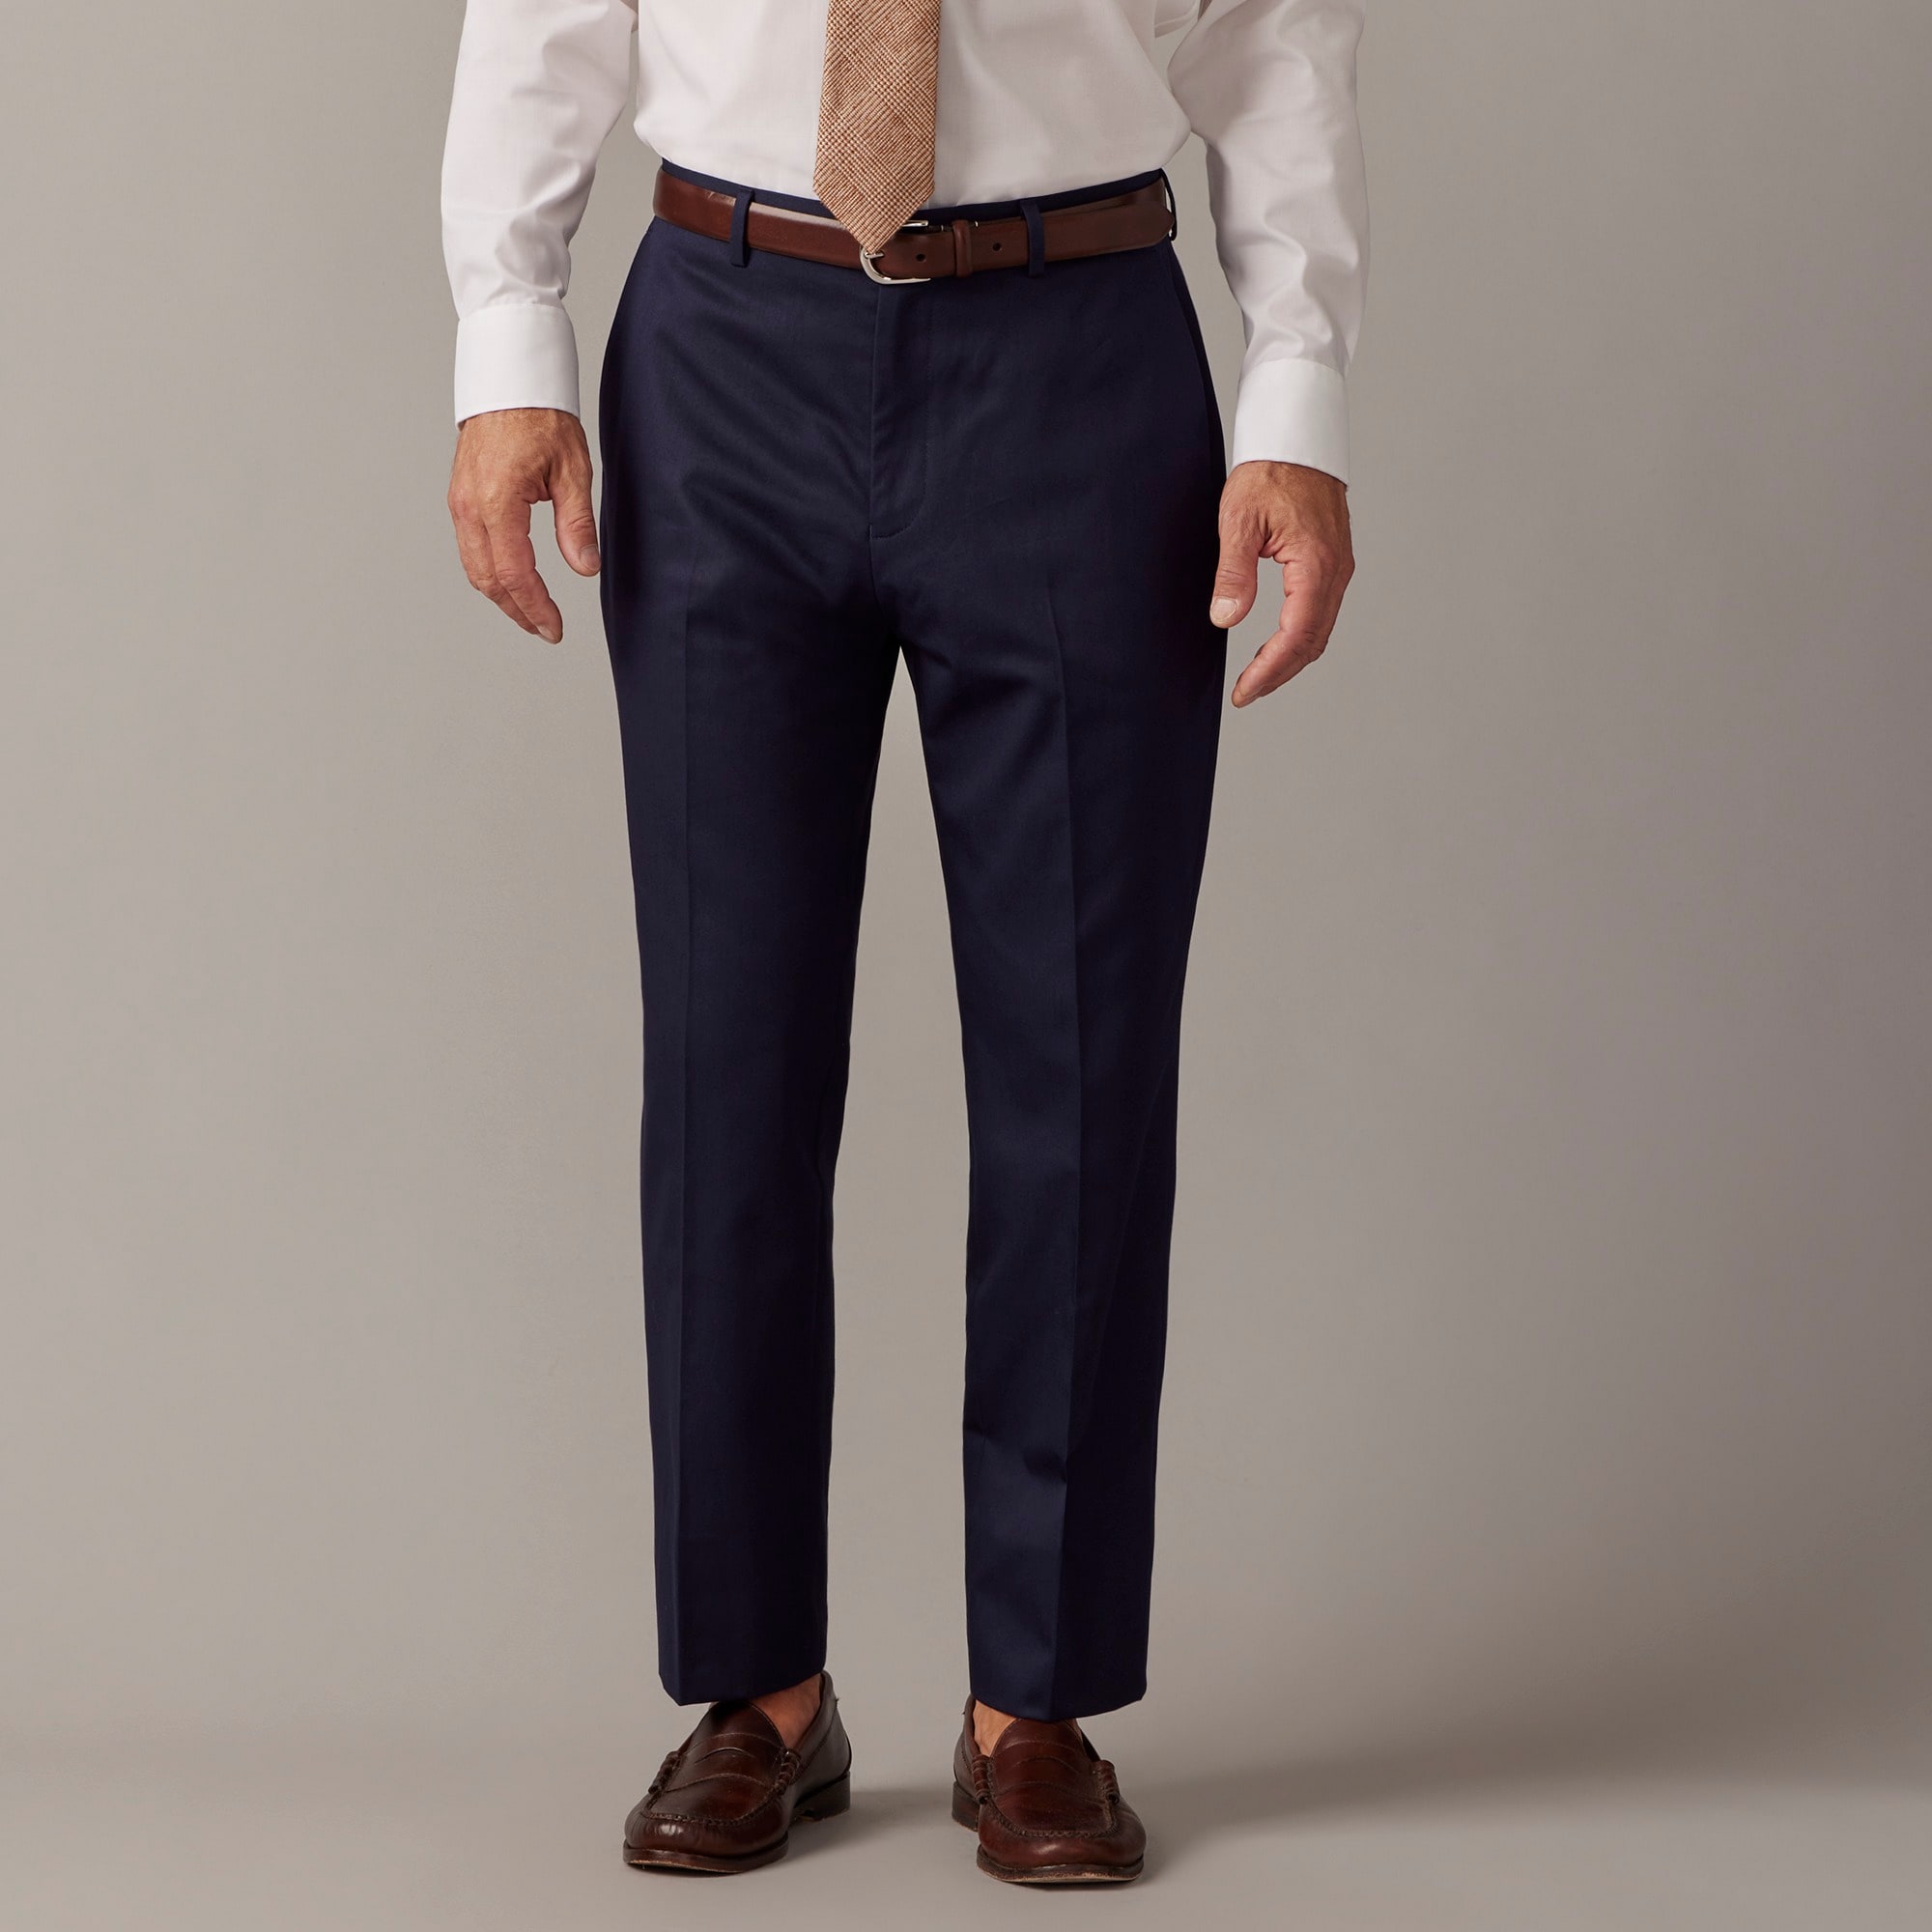 Jcrew Crosby Classic-fit suit pant in Italian chino